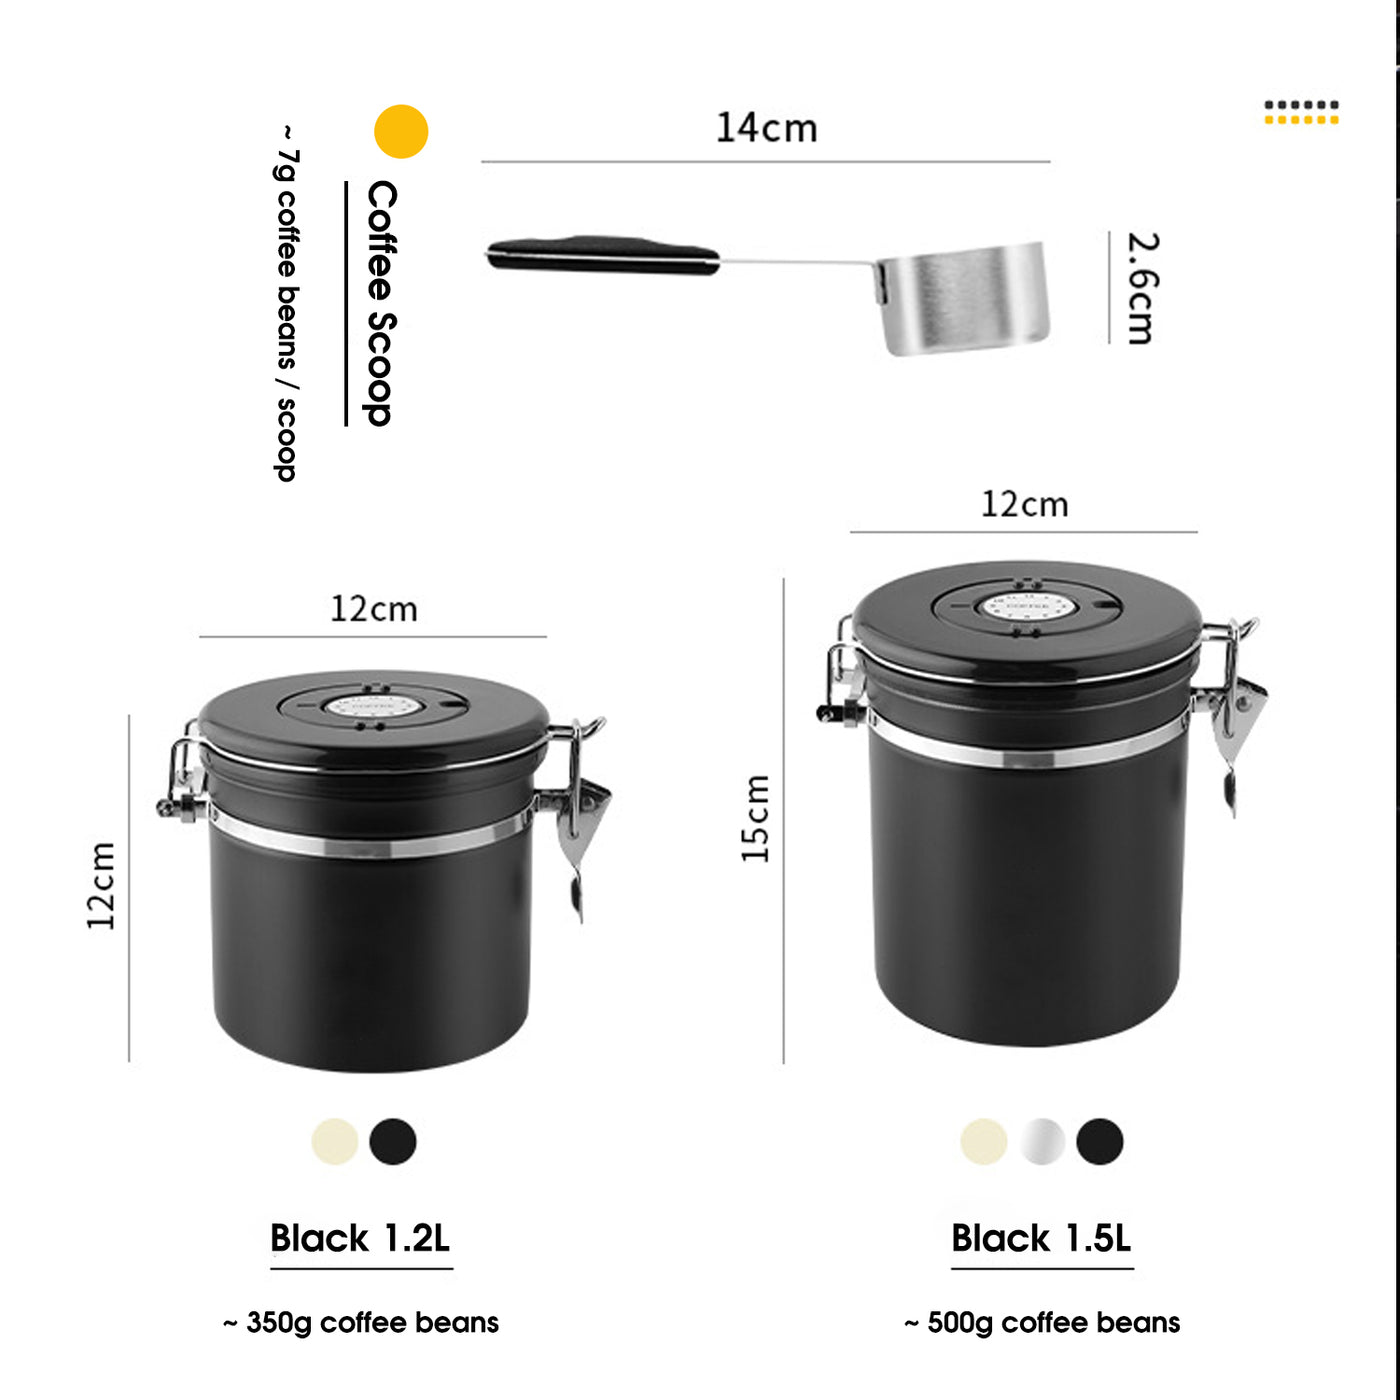 Coffee Canister, Airtight Stainless Steel Kitchen Food Storage Container with Date Tracker and Scoop for Beans, Grounds, Tea, Flour, Cereal, Sugar